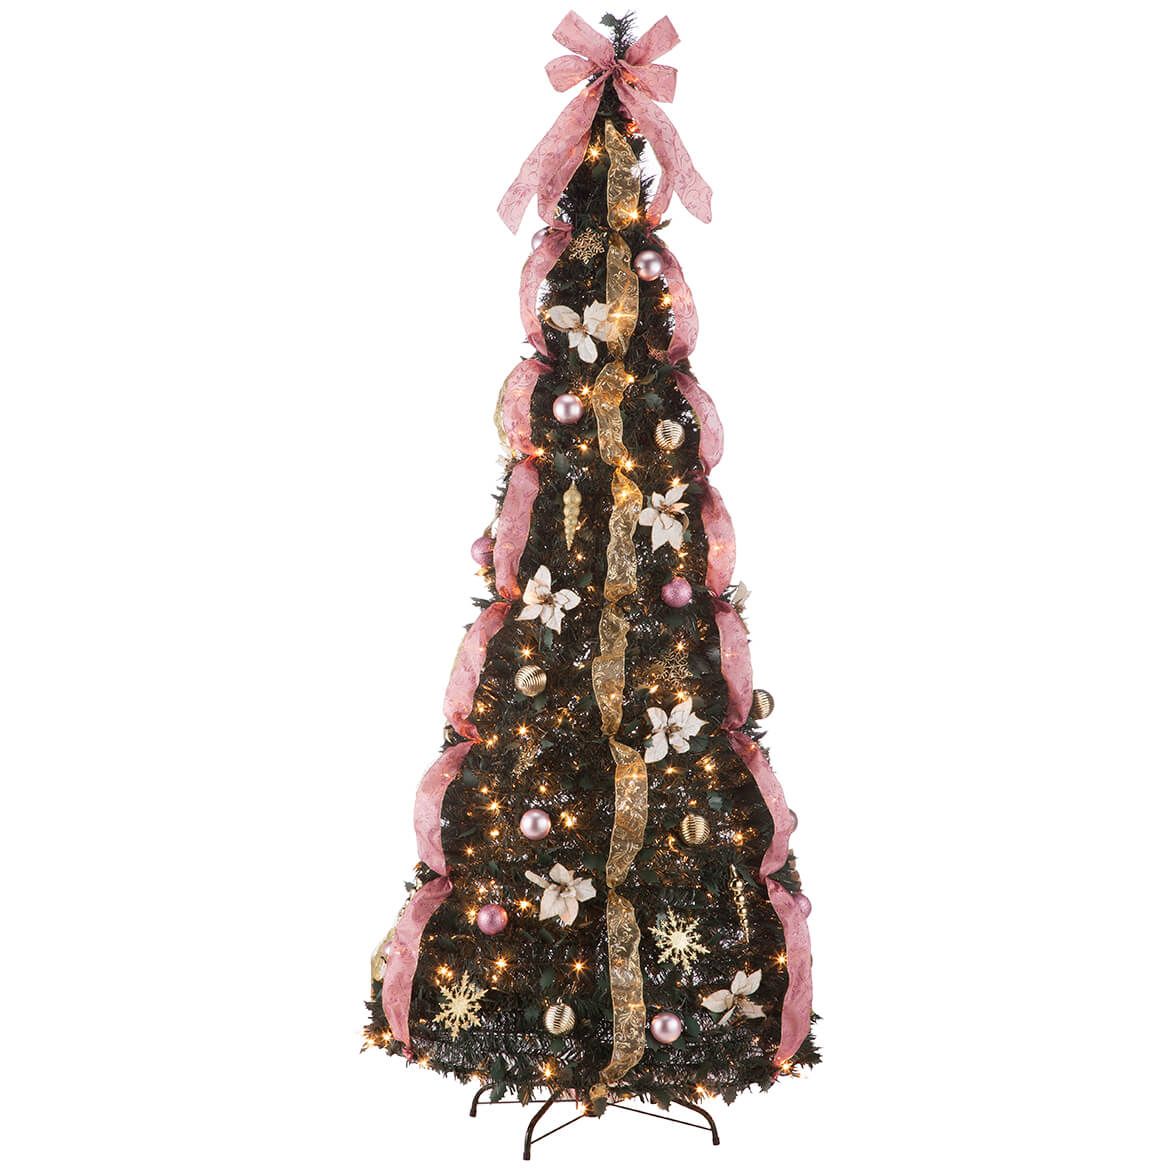 7' Victorian Style Pull-Up Tree by Holiday Peak™     XL + '-' + 367932